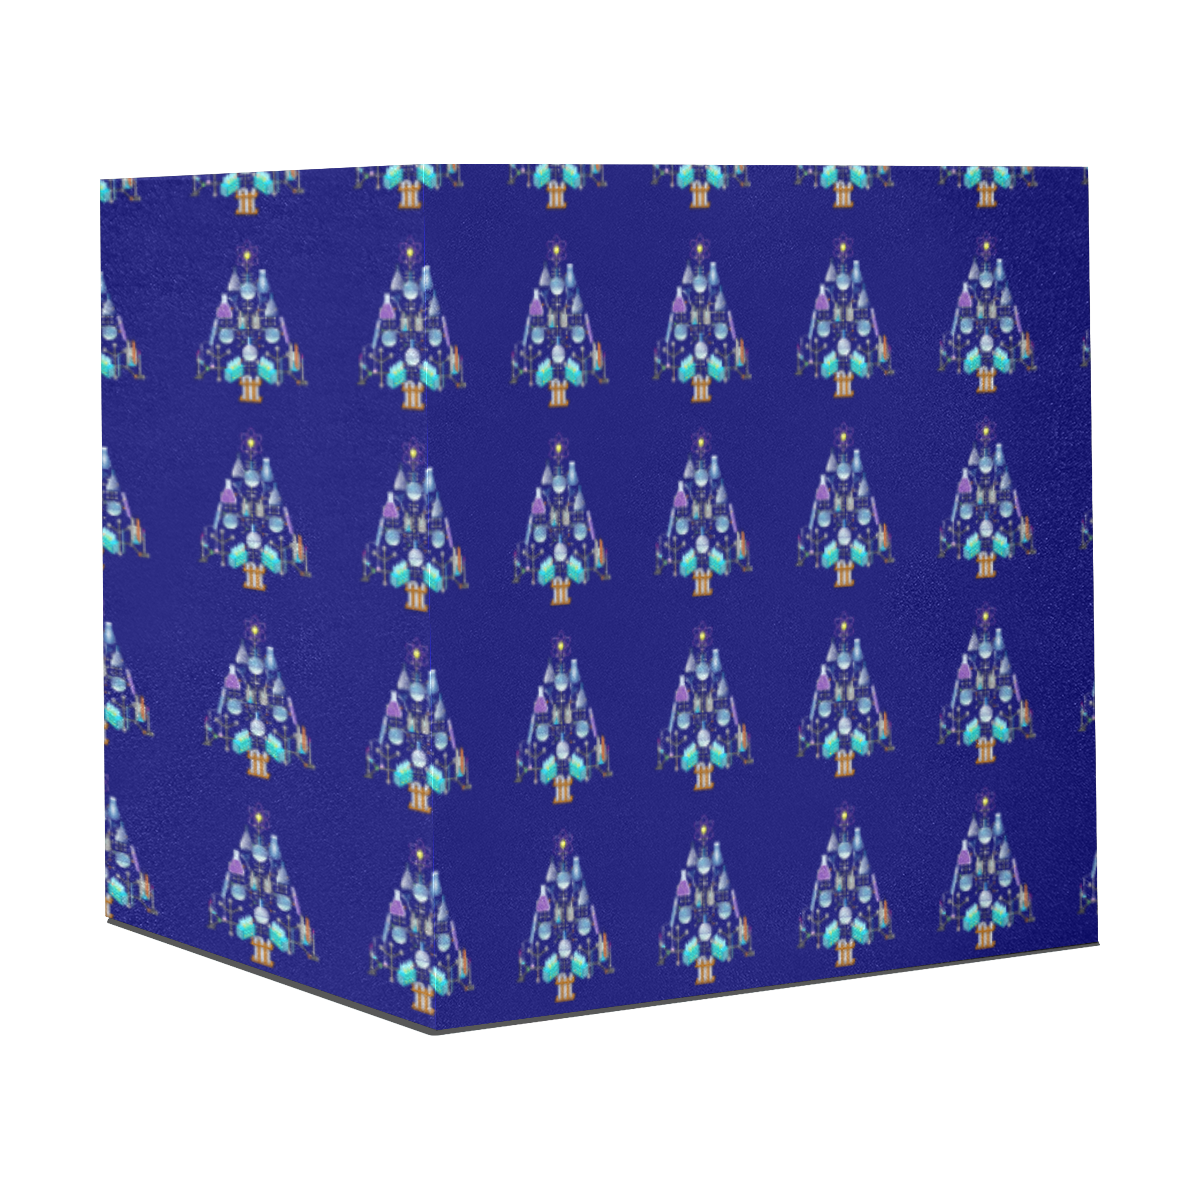 Oh Chemist Tree, Oh Chemistry, Science Christmas on Blue Gift Wrapping Paper 58"x 23" (5 Rolls)